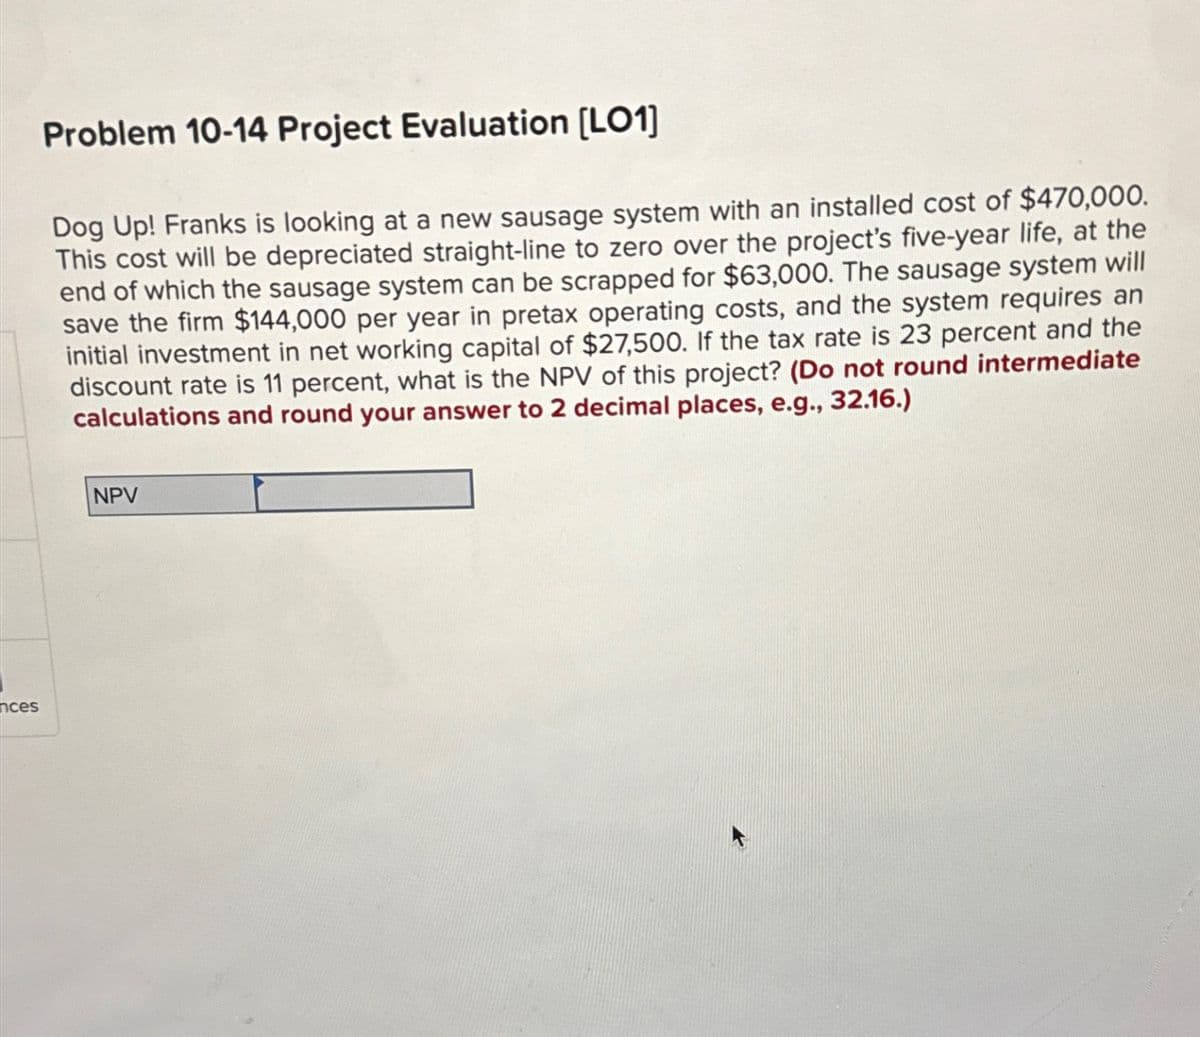 nces
Problem 10-14 Project Evaluation [LO1]
Dog Up! Franks is looking at a new sausage system with an installed cost of $470,000.
This cost will be depreciated straight-line to zero over the project's five-year life, at the
end of which the sausage system can be scrapped for $63,000. The sausage system will
save the firm $144,000 per year in pretax operating costs, and the system requires an
initial investment in net working capital of $27,500. If the tax rate is 23 percent and the
discount rate is 11 percent, what is the NPV of this project? (Do not round intermediate
calculations and round your answer to 2 decimal places, e.g., 32.16.)
NPV